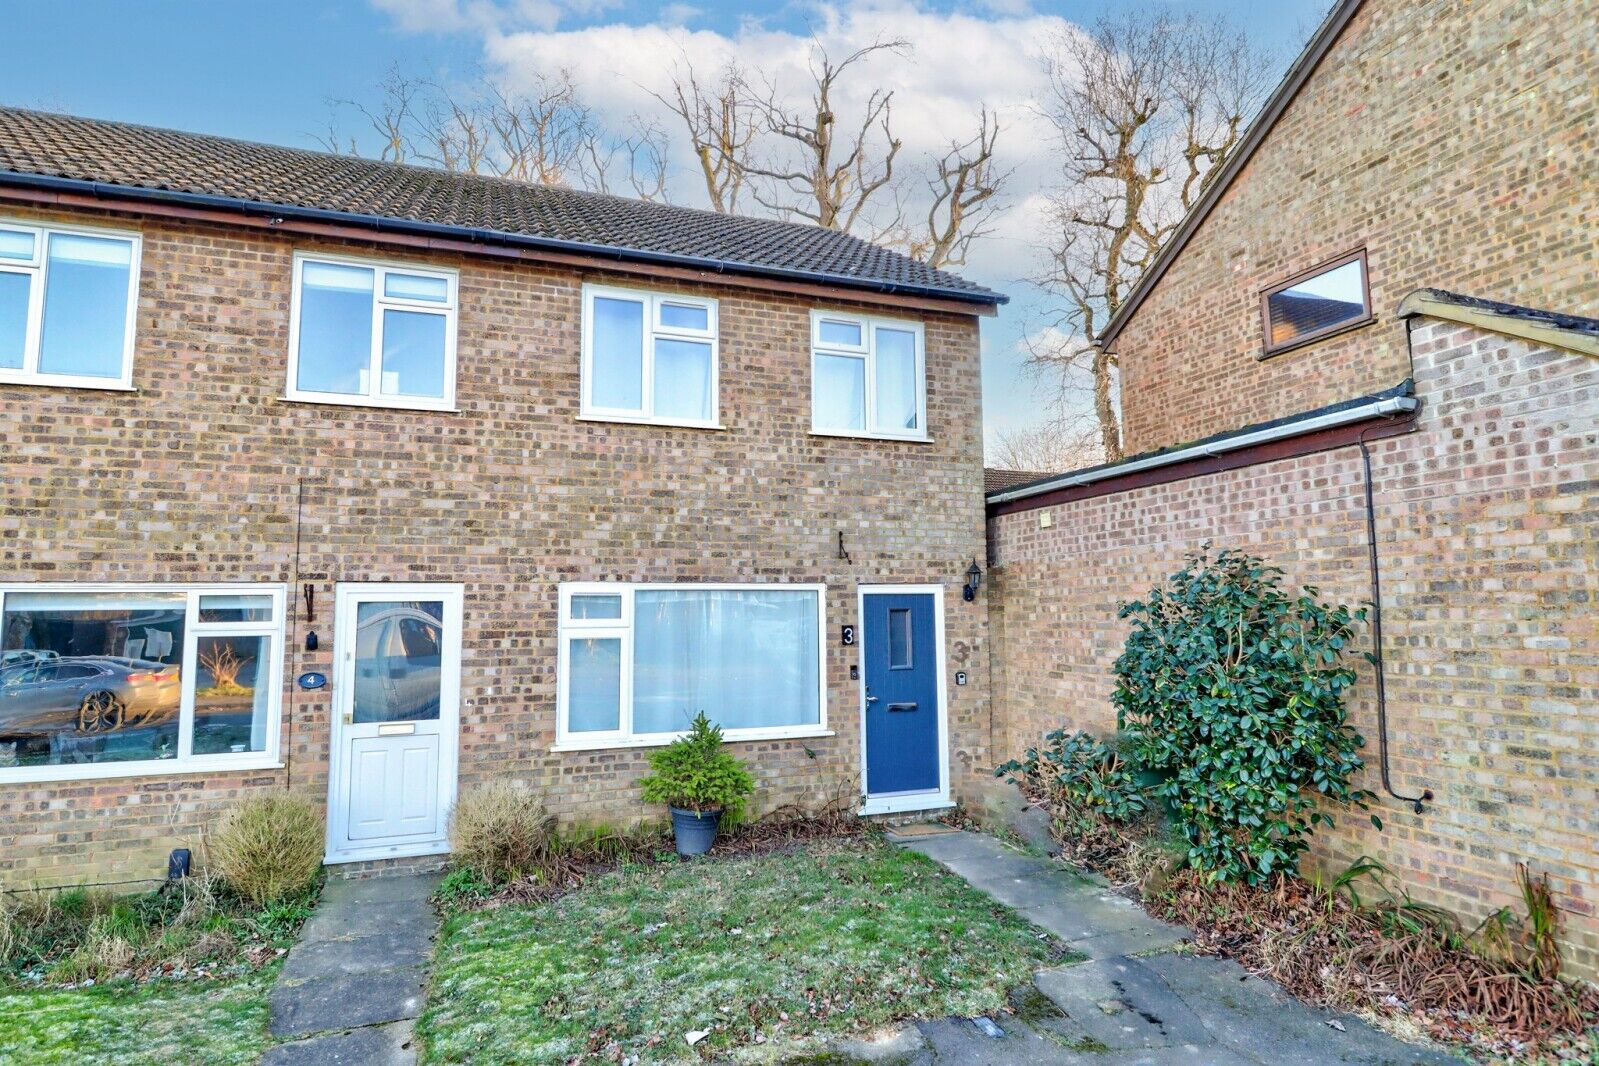 2 bedroom end terraced house for sale Carrington Way, Prestwood, HP16, main image